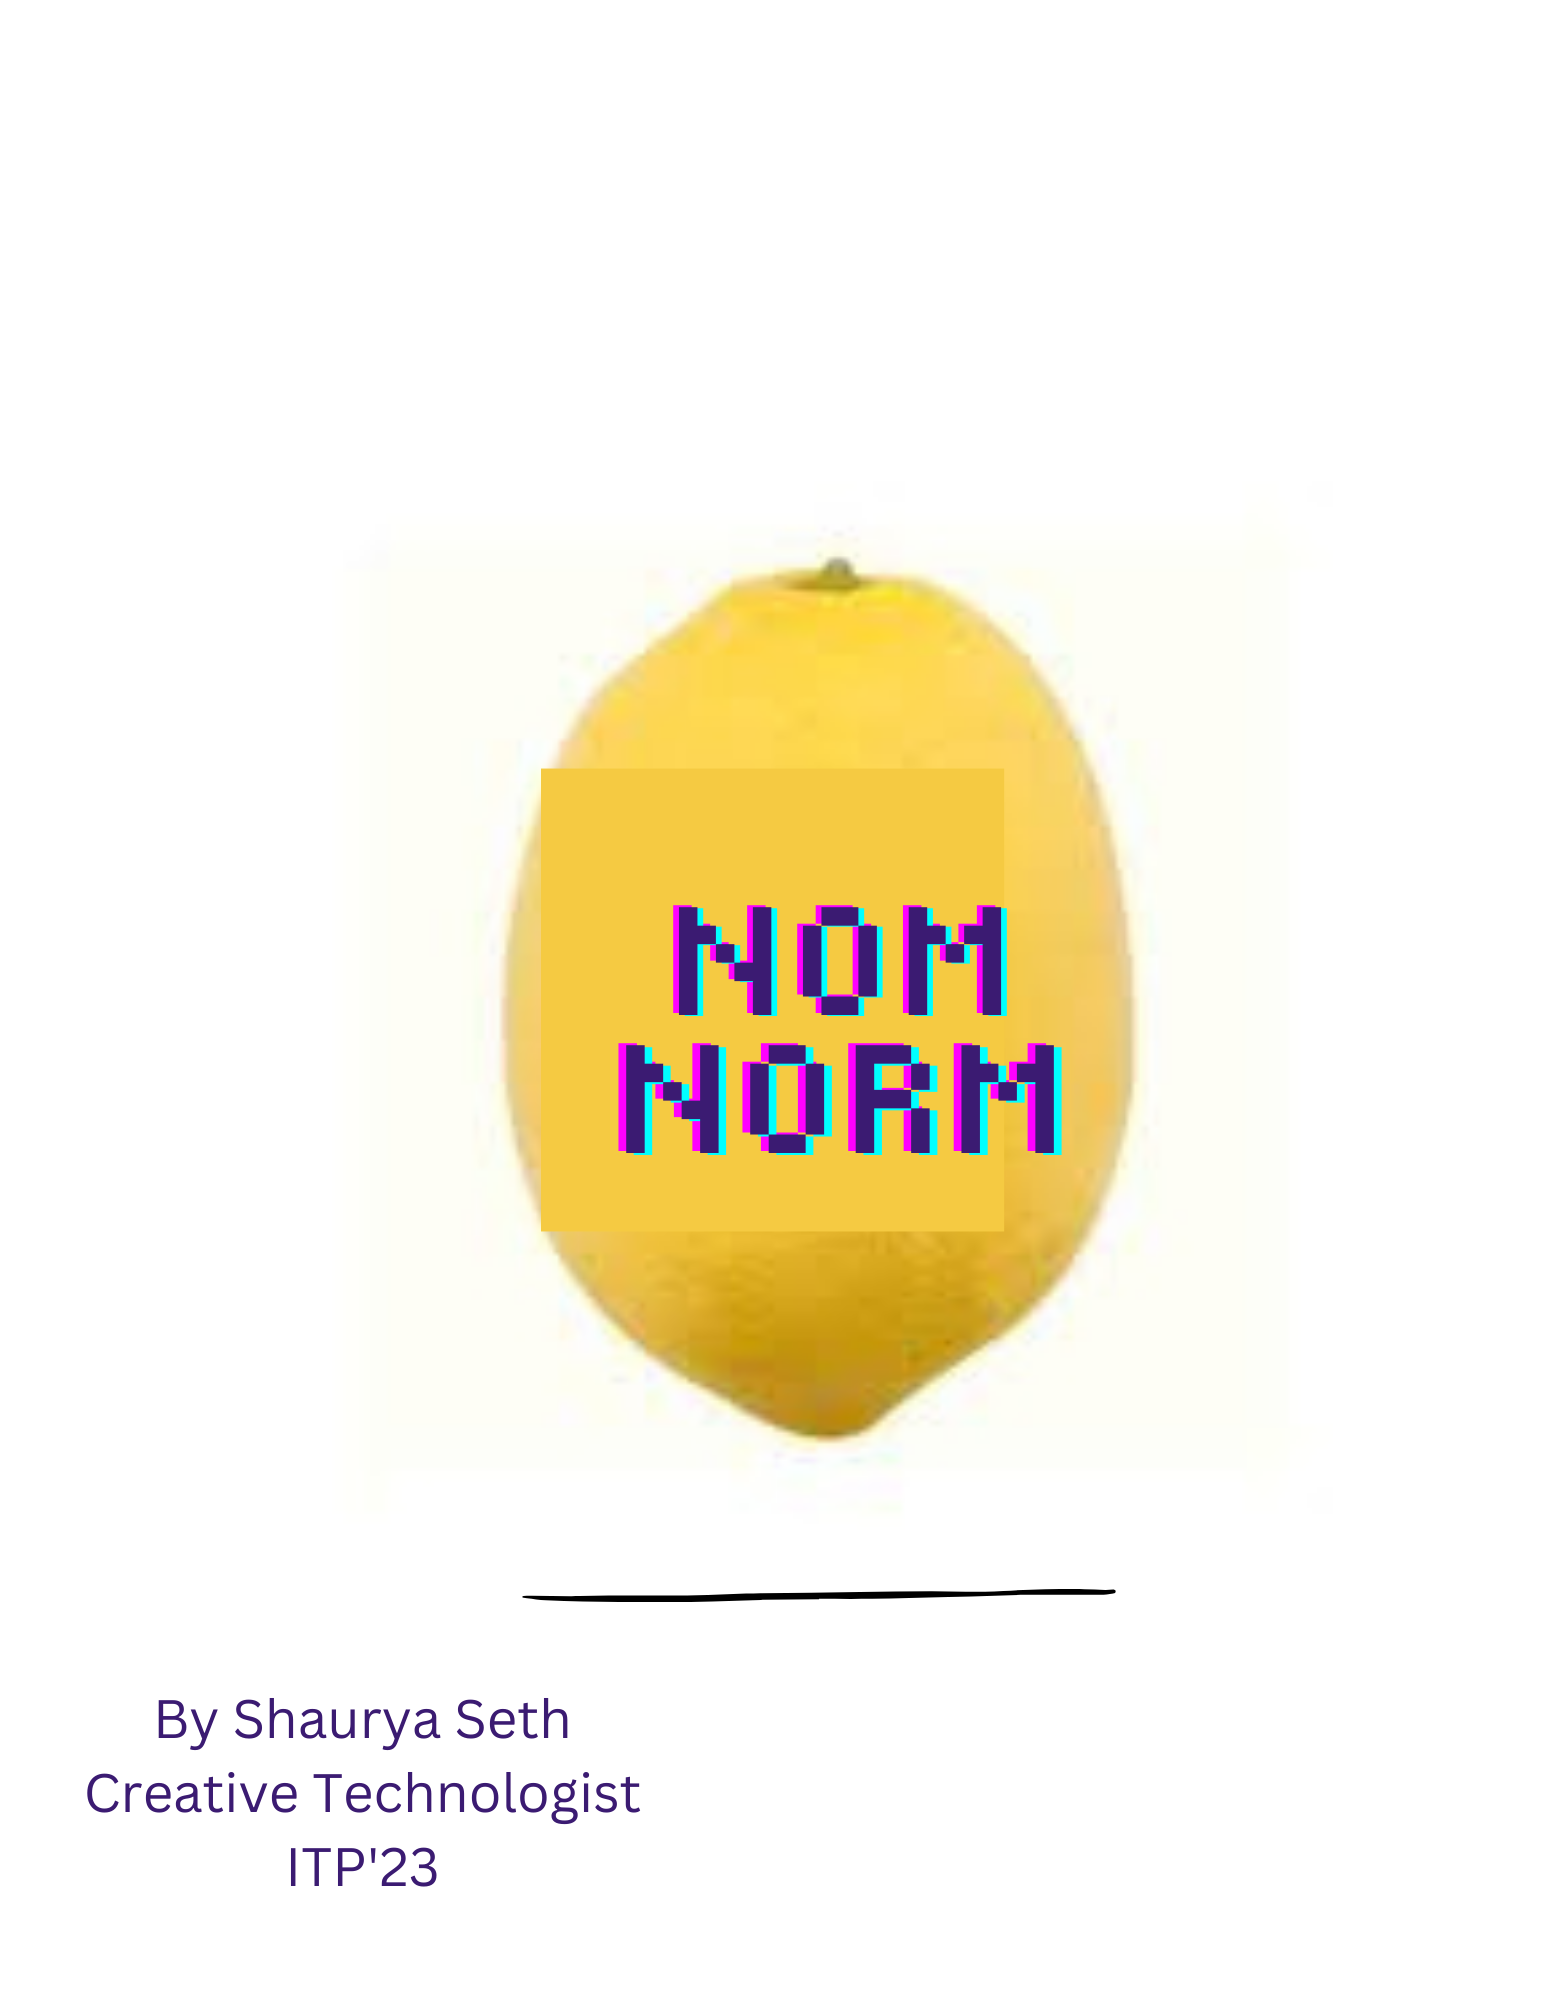 Nom Norm is the culmination of my projects at ITP!